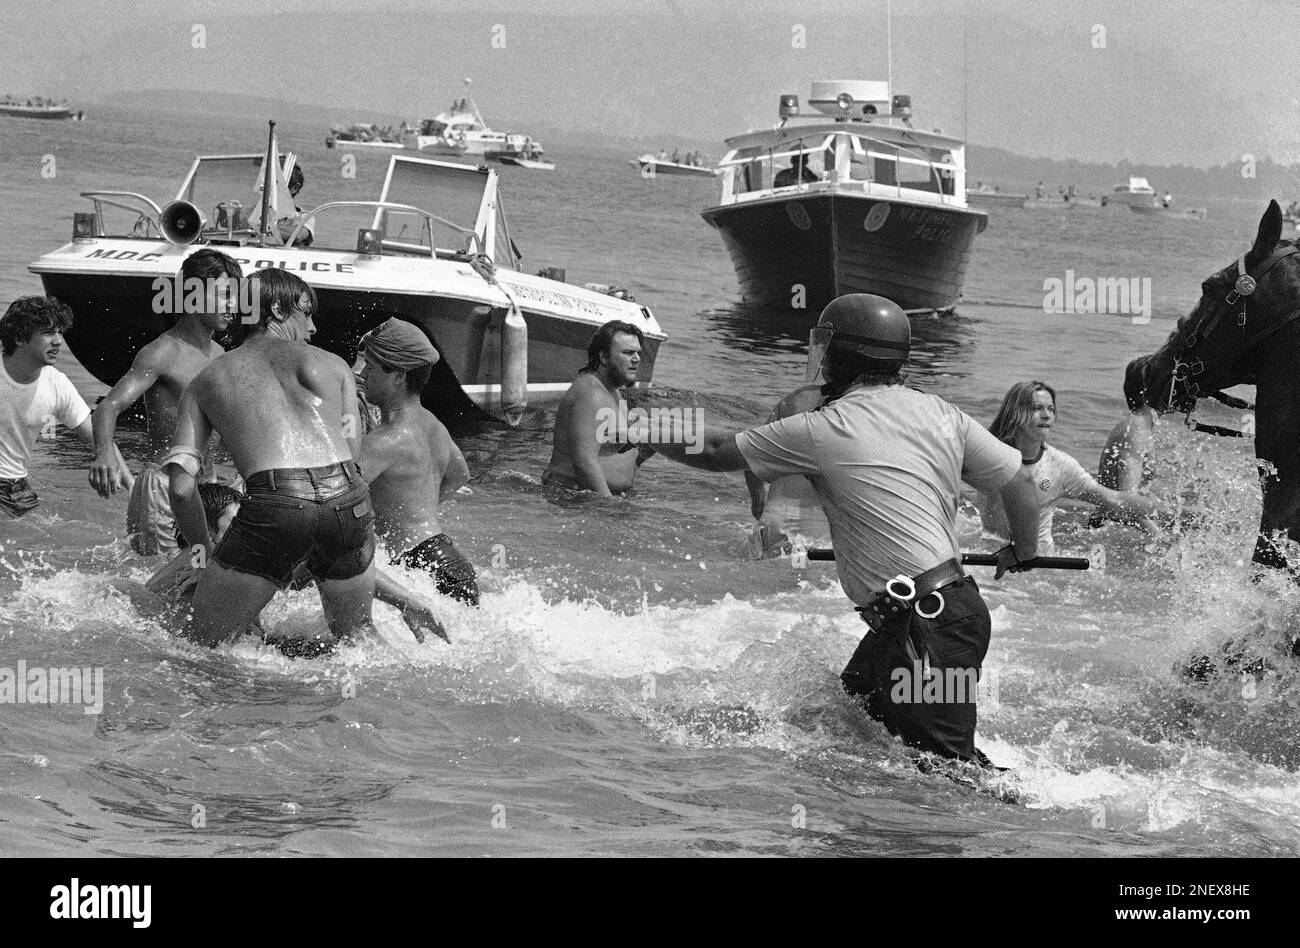 A policeman charges into the water, Aug. 10, 1975 at Carson Beach in  Boston, in pursuit of bathing demonstrators. Black and white bathers threw  rocks and bricks at one another. About 500